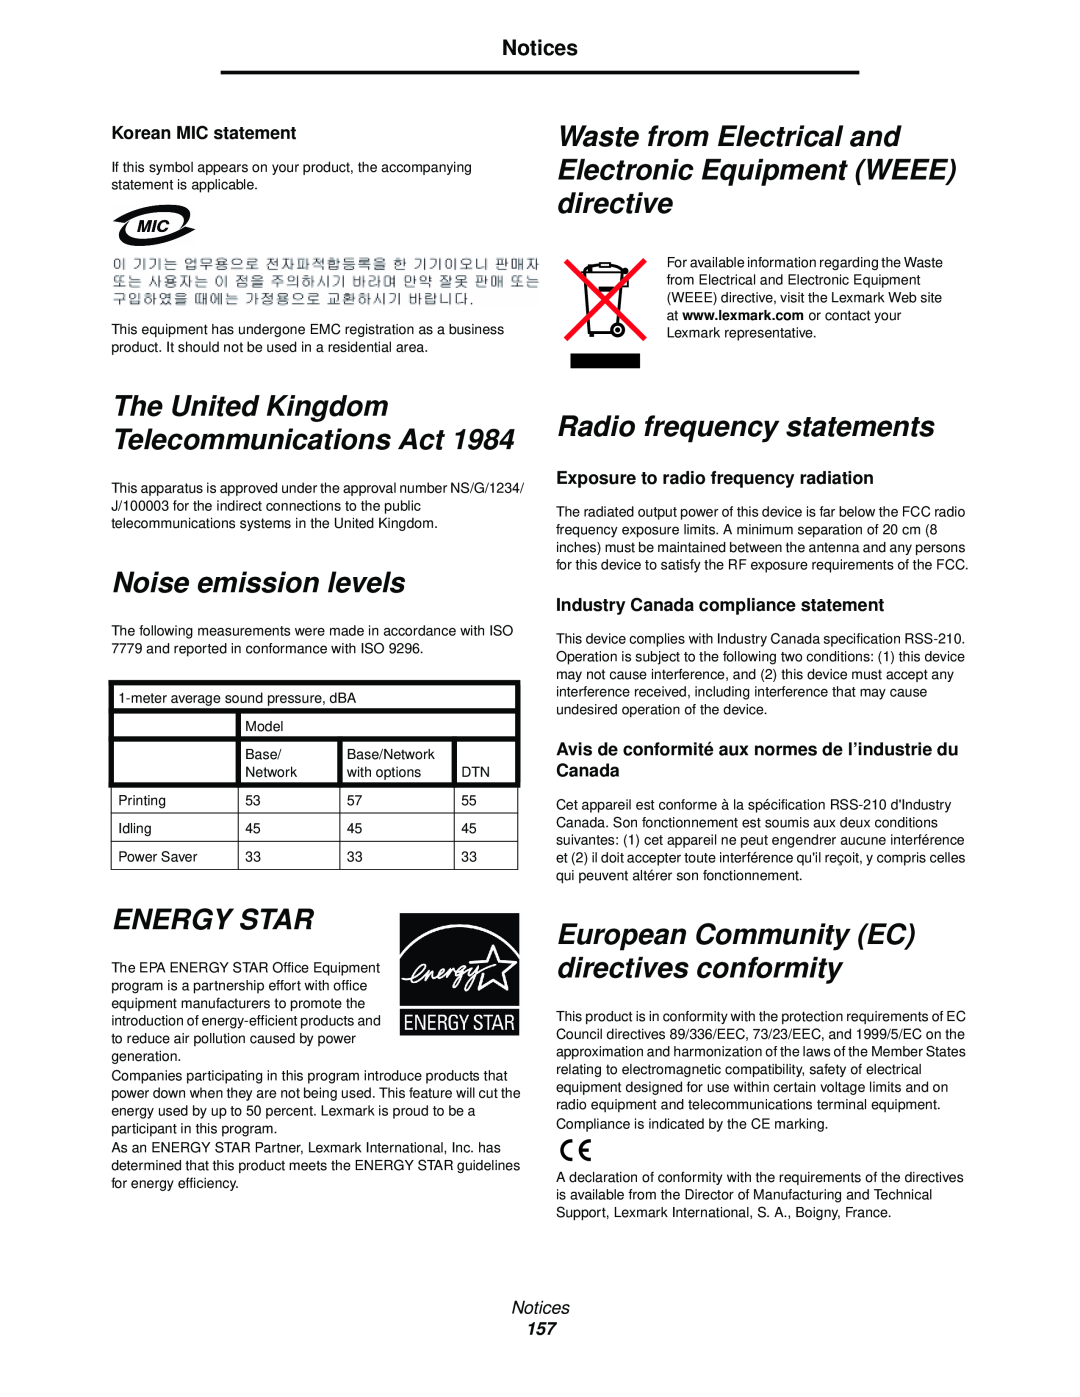 Lexmark 920 Waste from Electrical and Electronic Equipment WEEE directive, Noise emission levels, Energy Star, Notices 